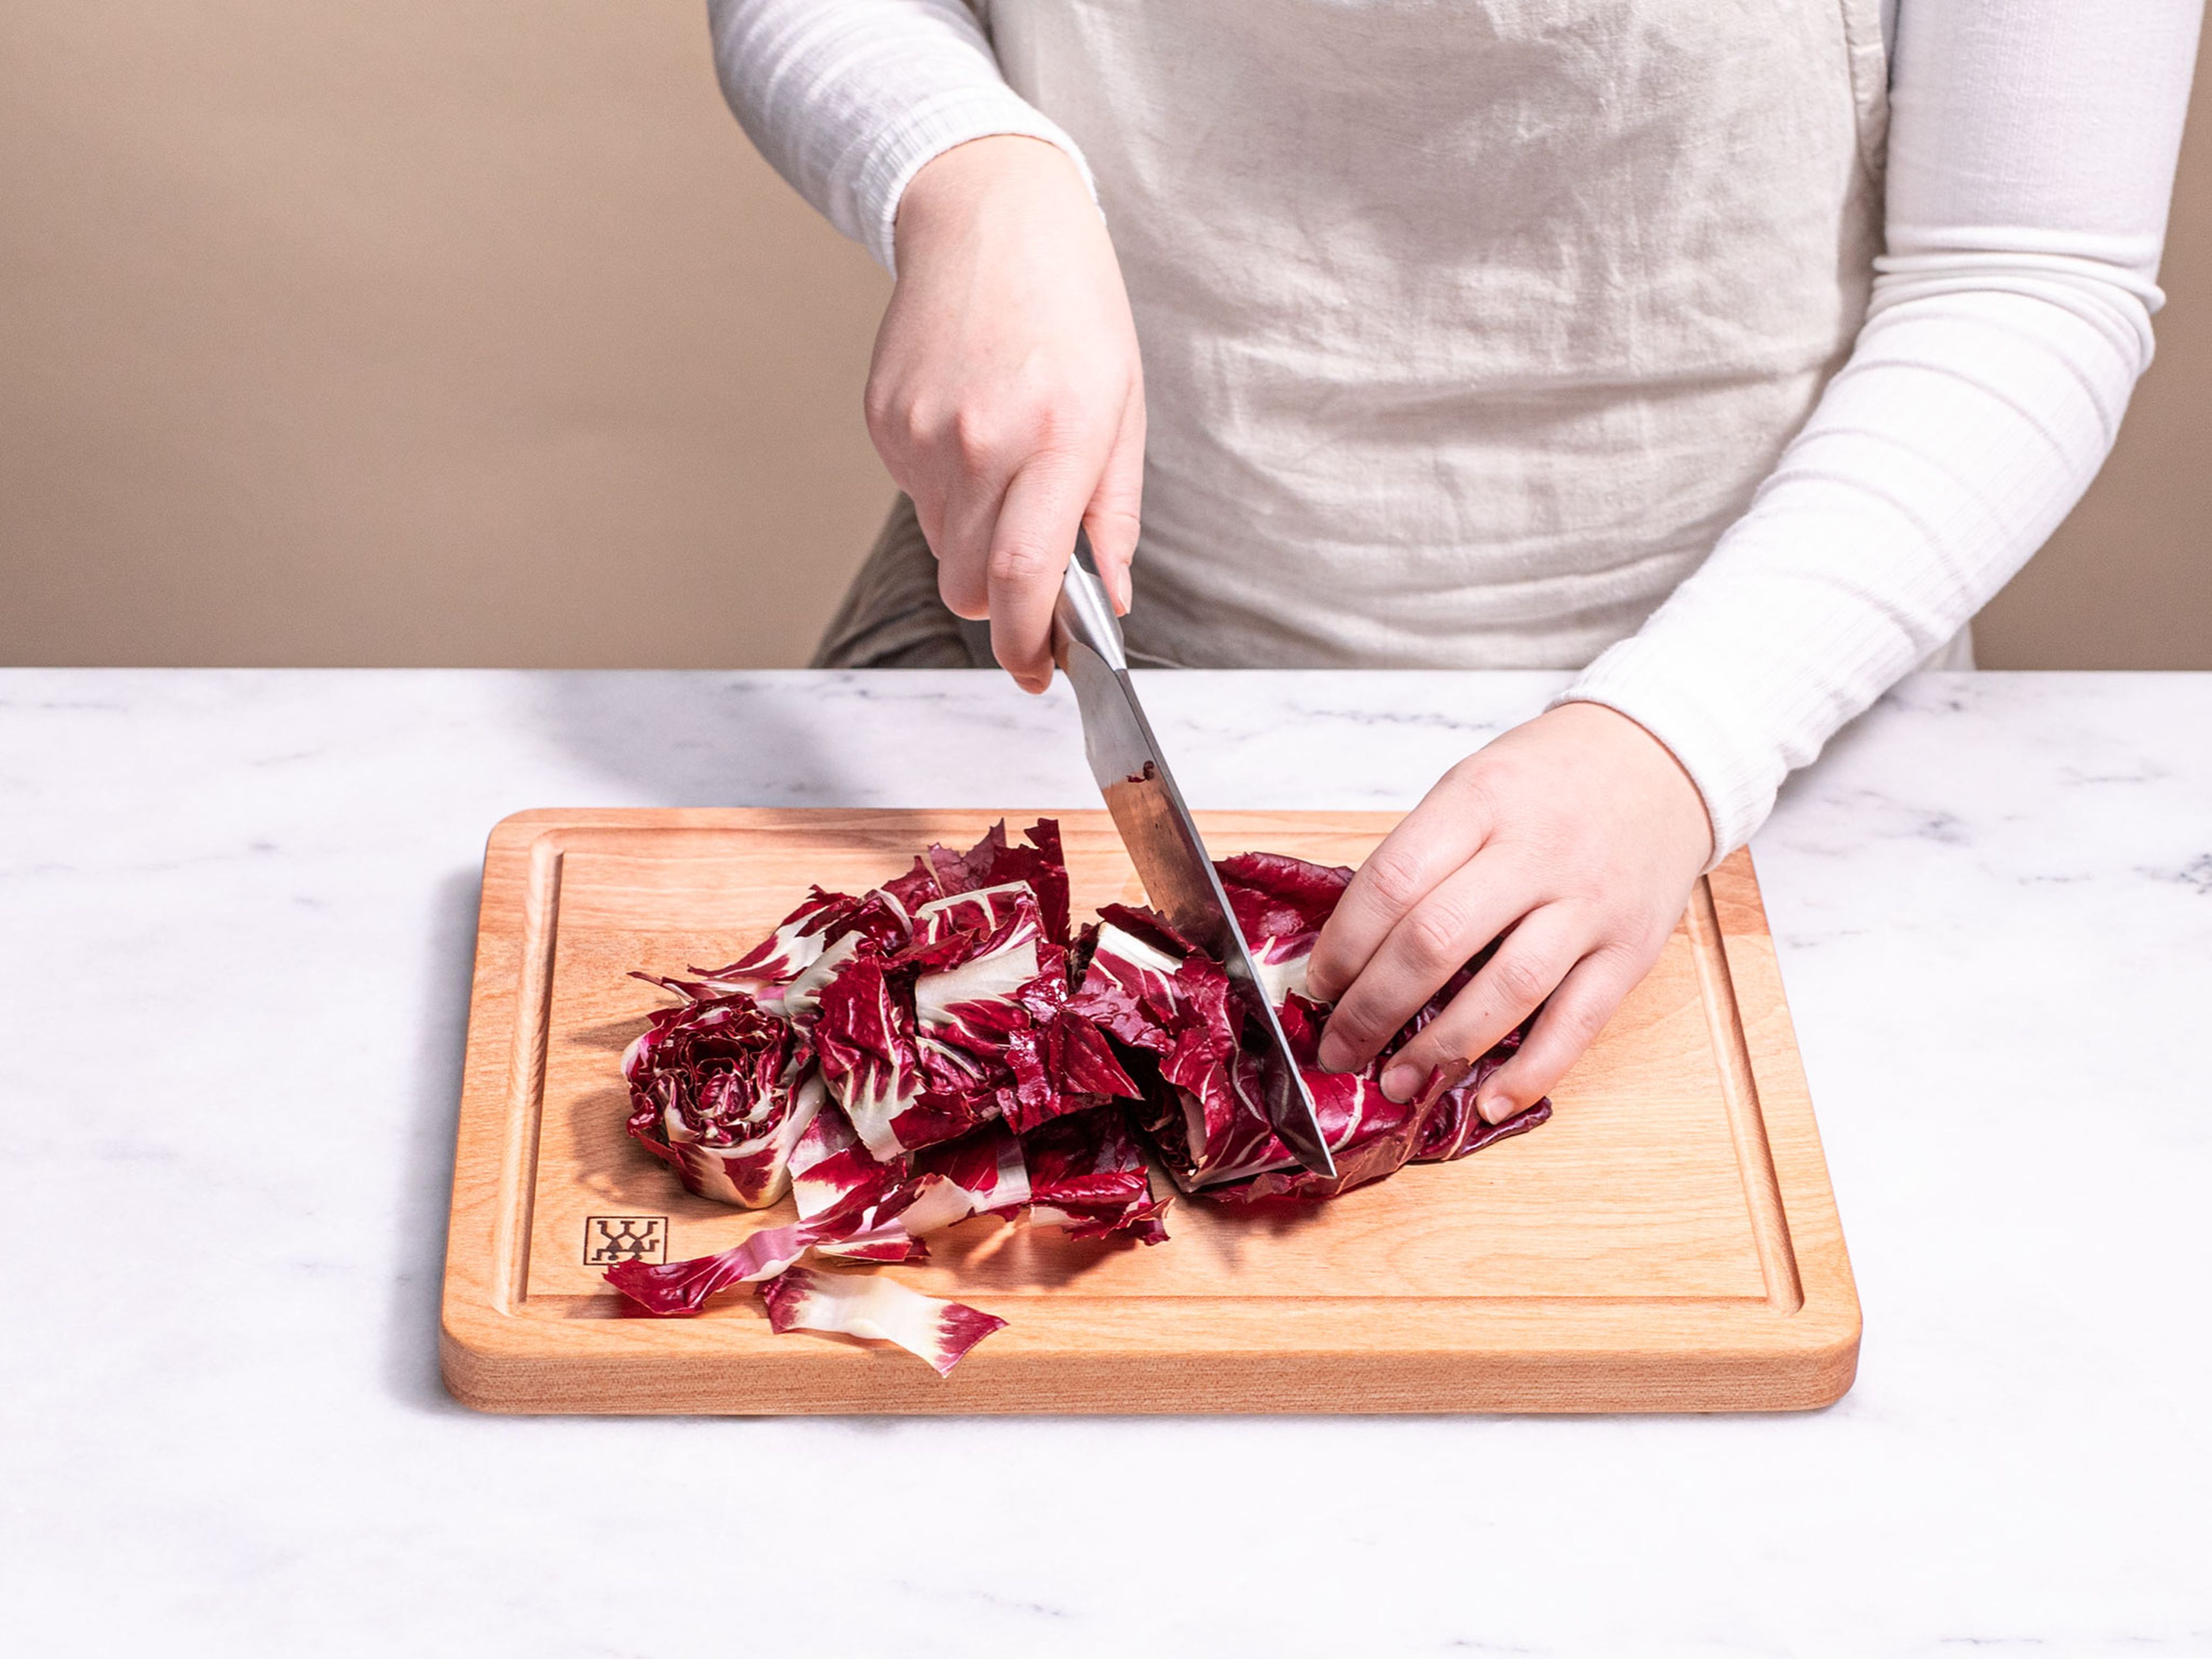 Thinly slice garlic clove. Chop radicchio into bite-sized pieces. Grate or finely slice Pecorino cheese. Remove leaves from thyme sprigs.